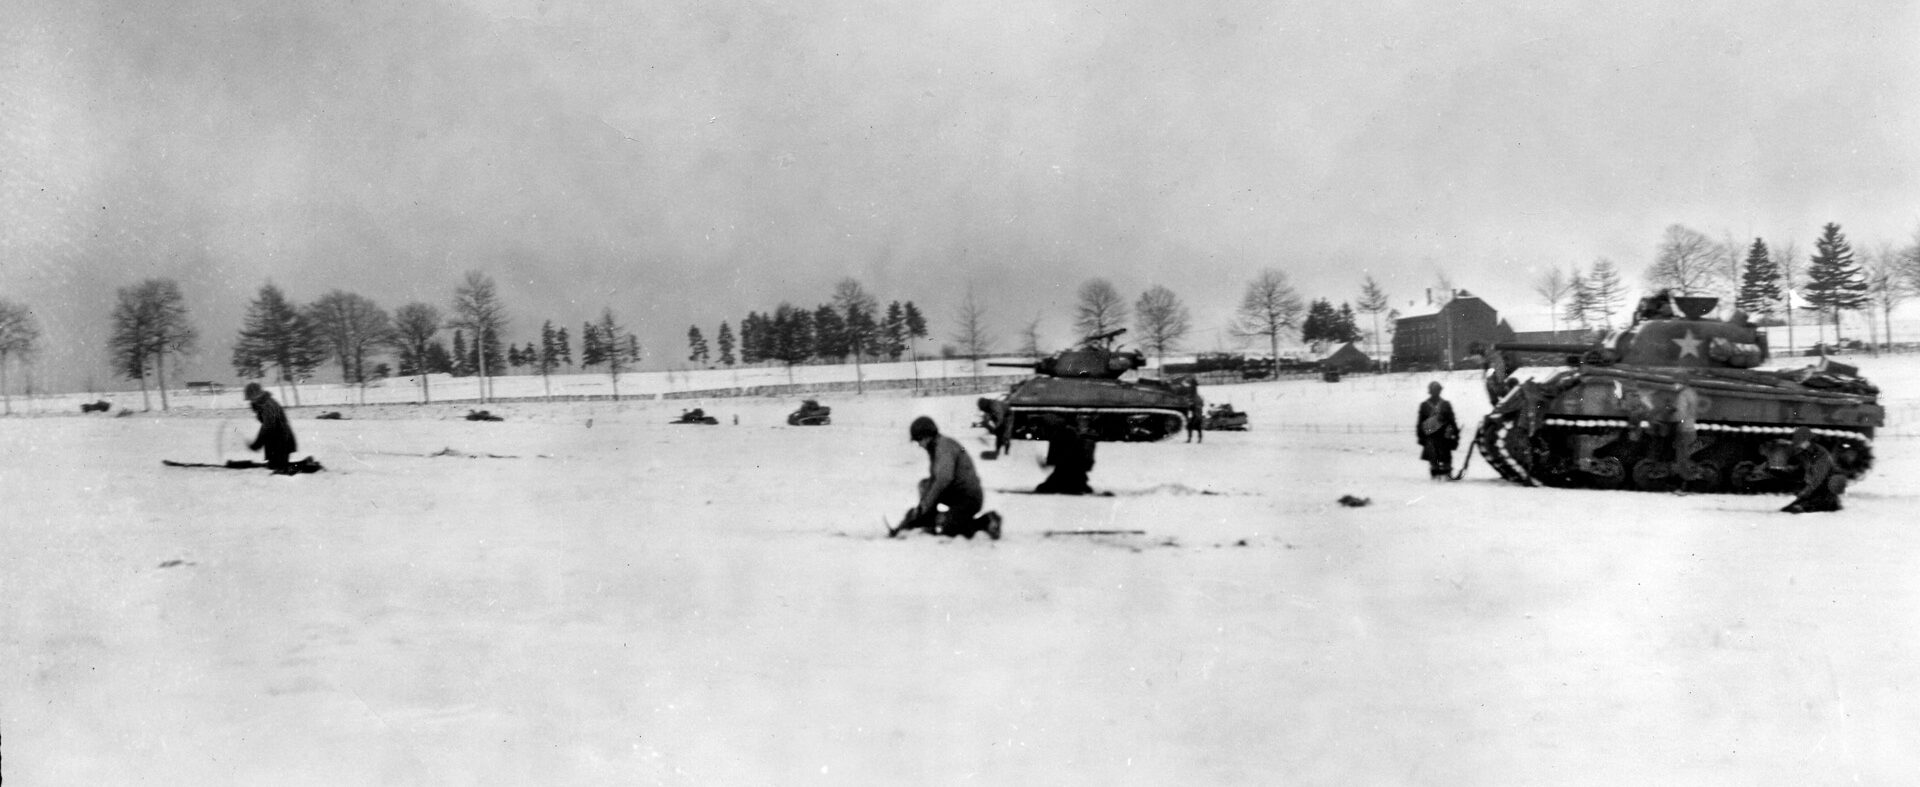 During heavy fighting against German forces in the vicinity of Bastogne, armored infantrymen of the 6th Armored Division advance cautiously across a snow-covered meadow. Sherman tanks are visible in support of the advance.